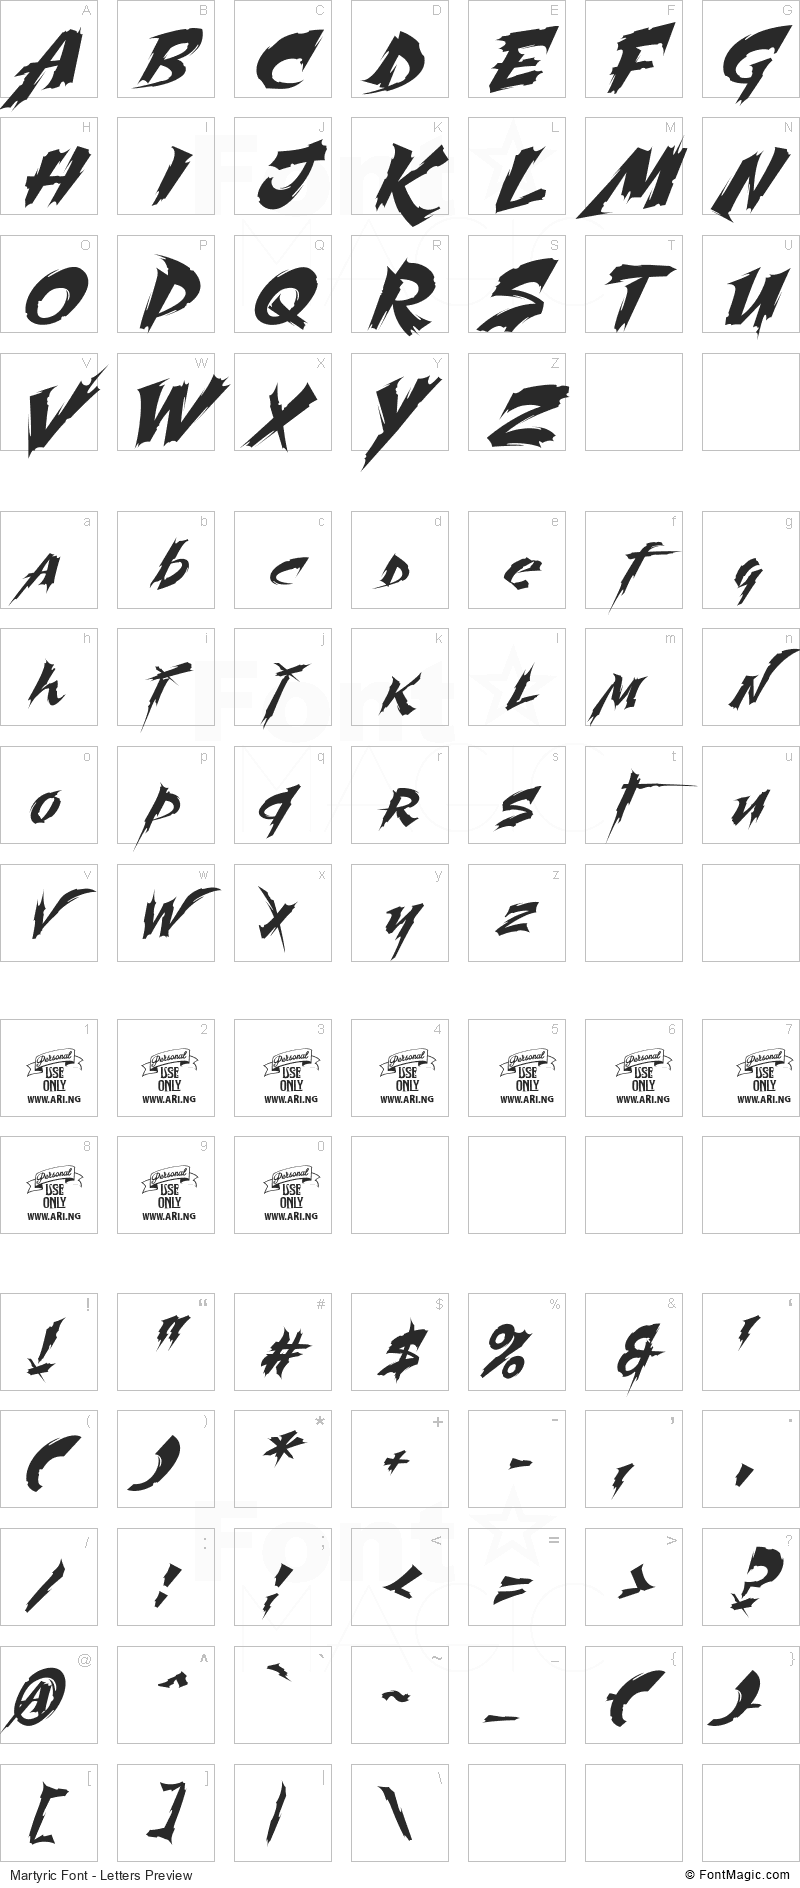 Martyric Font - All Latters Preview Chart